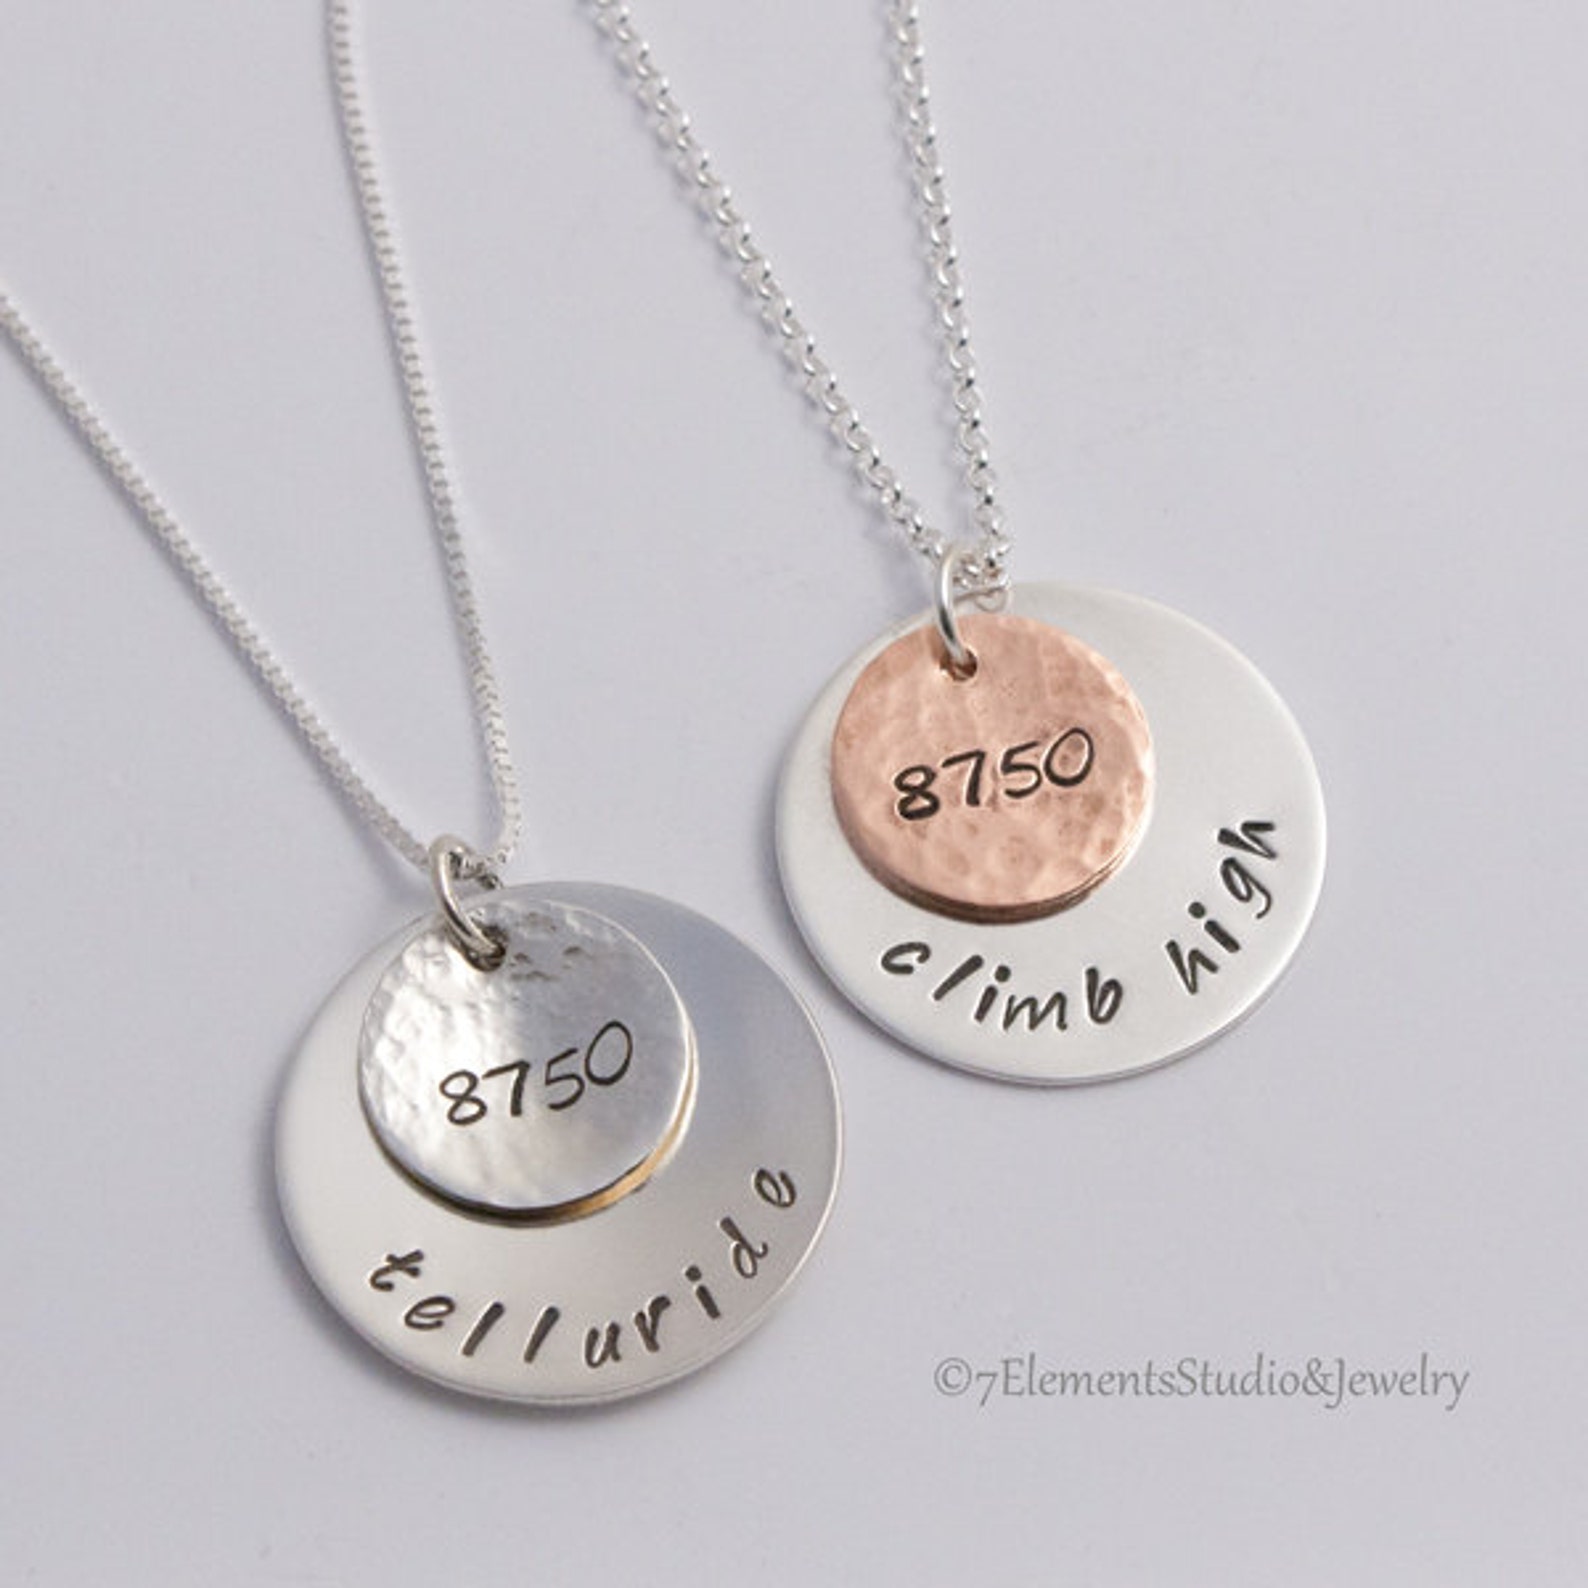 Telluride Elevation Necklace Silver 8750 Necklace Sterling - Etsy